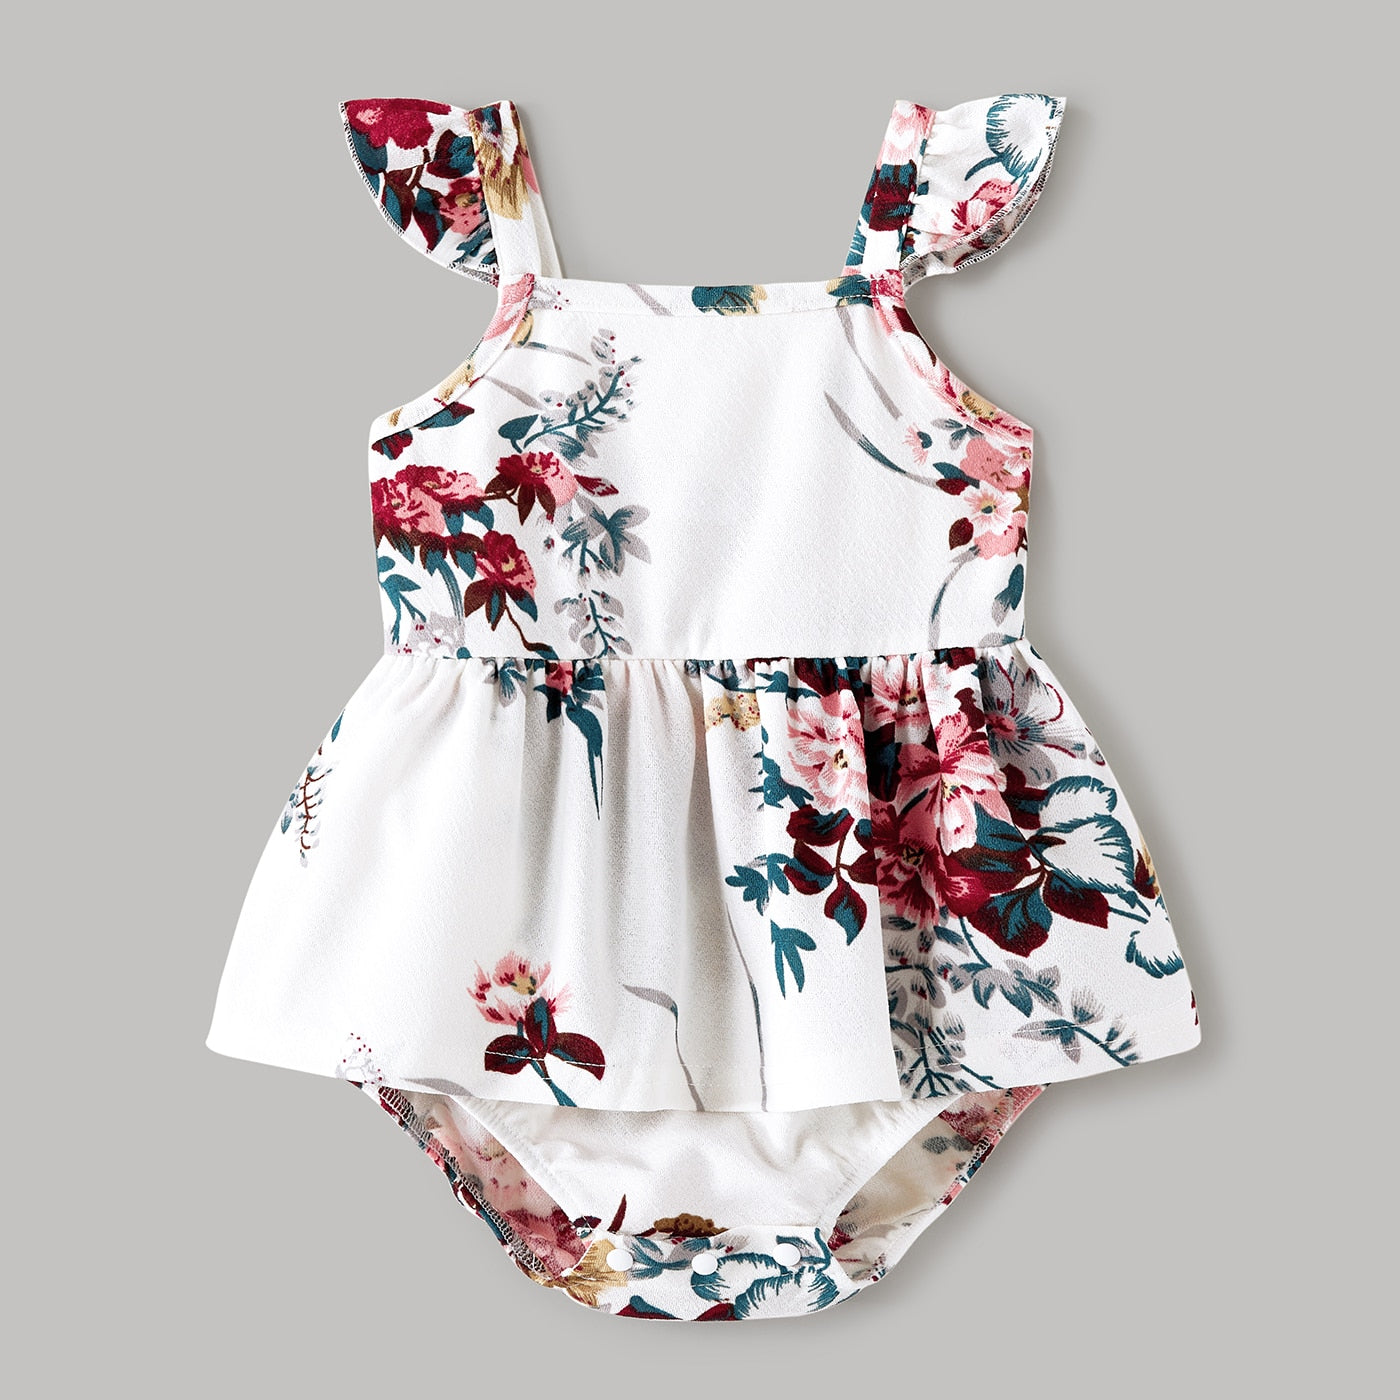 Family Matching! Floral Spaghetti Strap Dresses, Rompers & T-Shirts